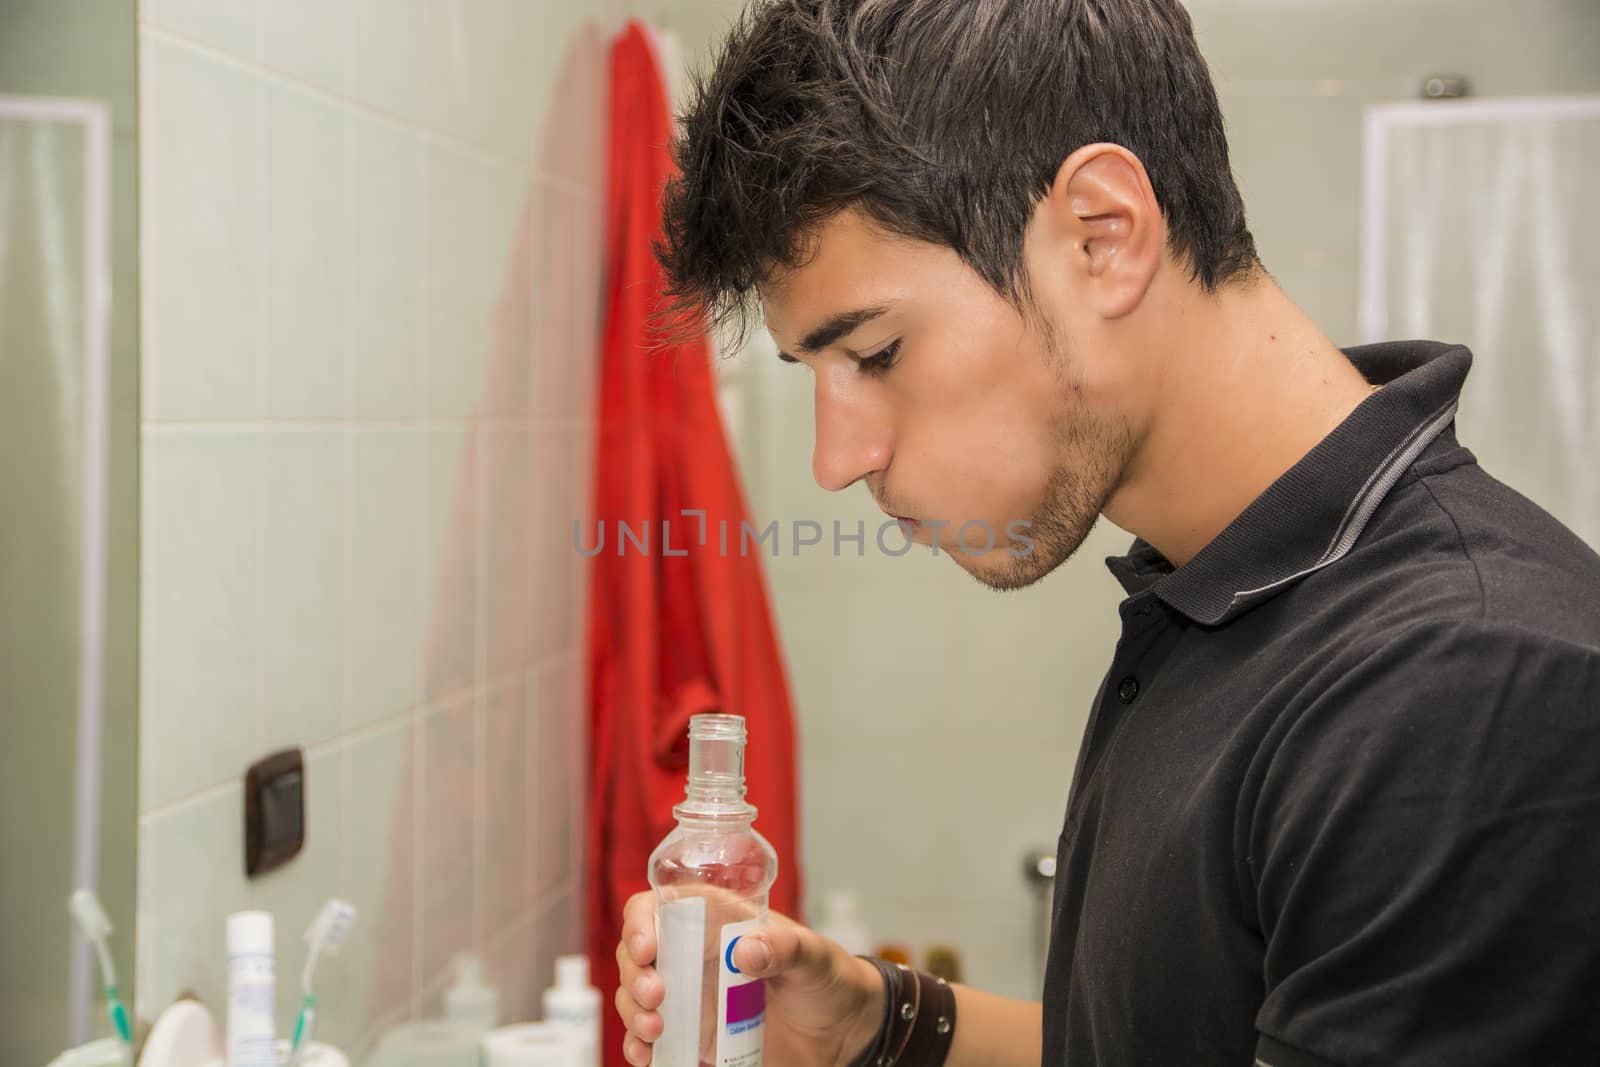 Young Man Rinsing with Mouth Wash in Bathroom by artofphoto